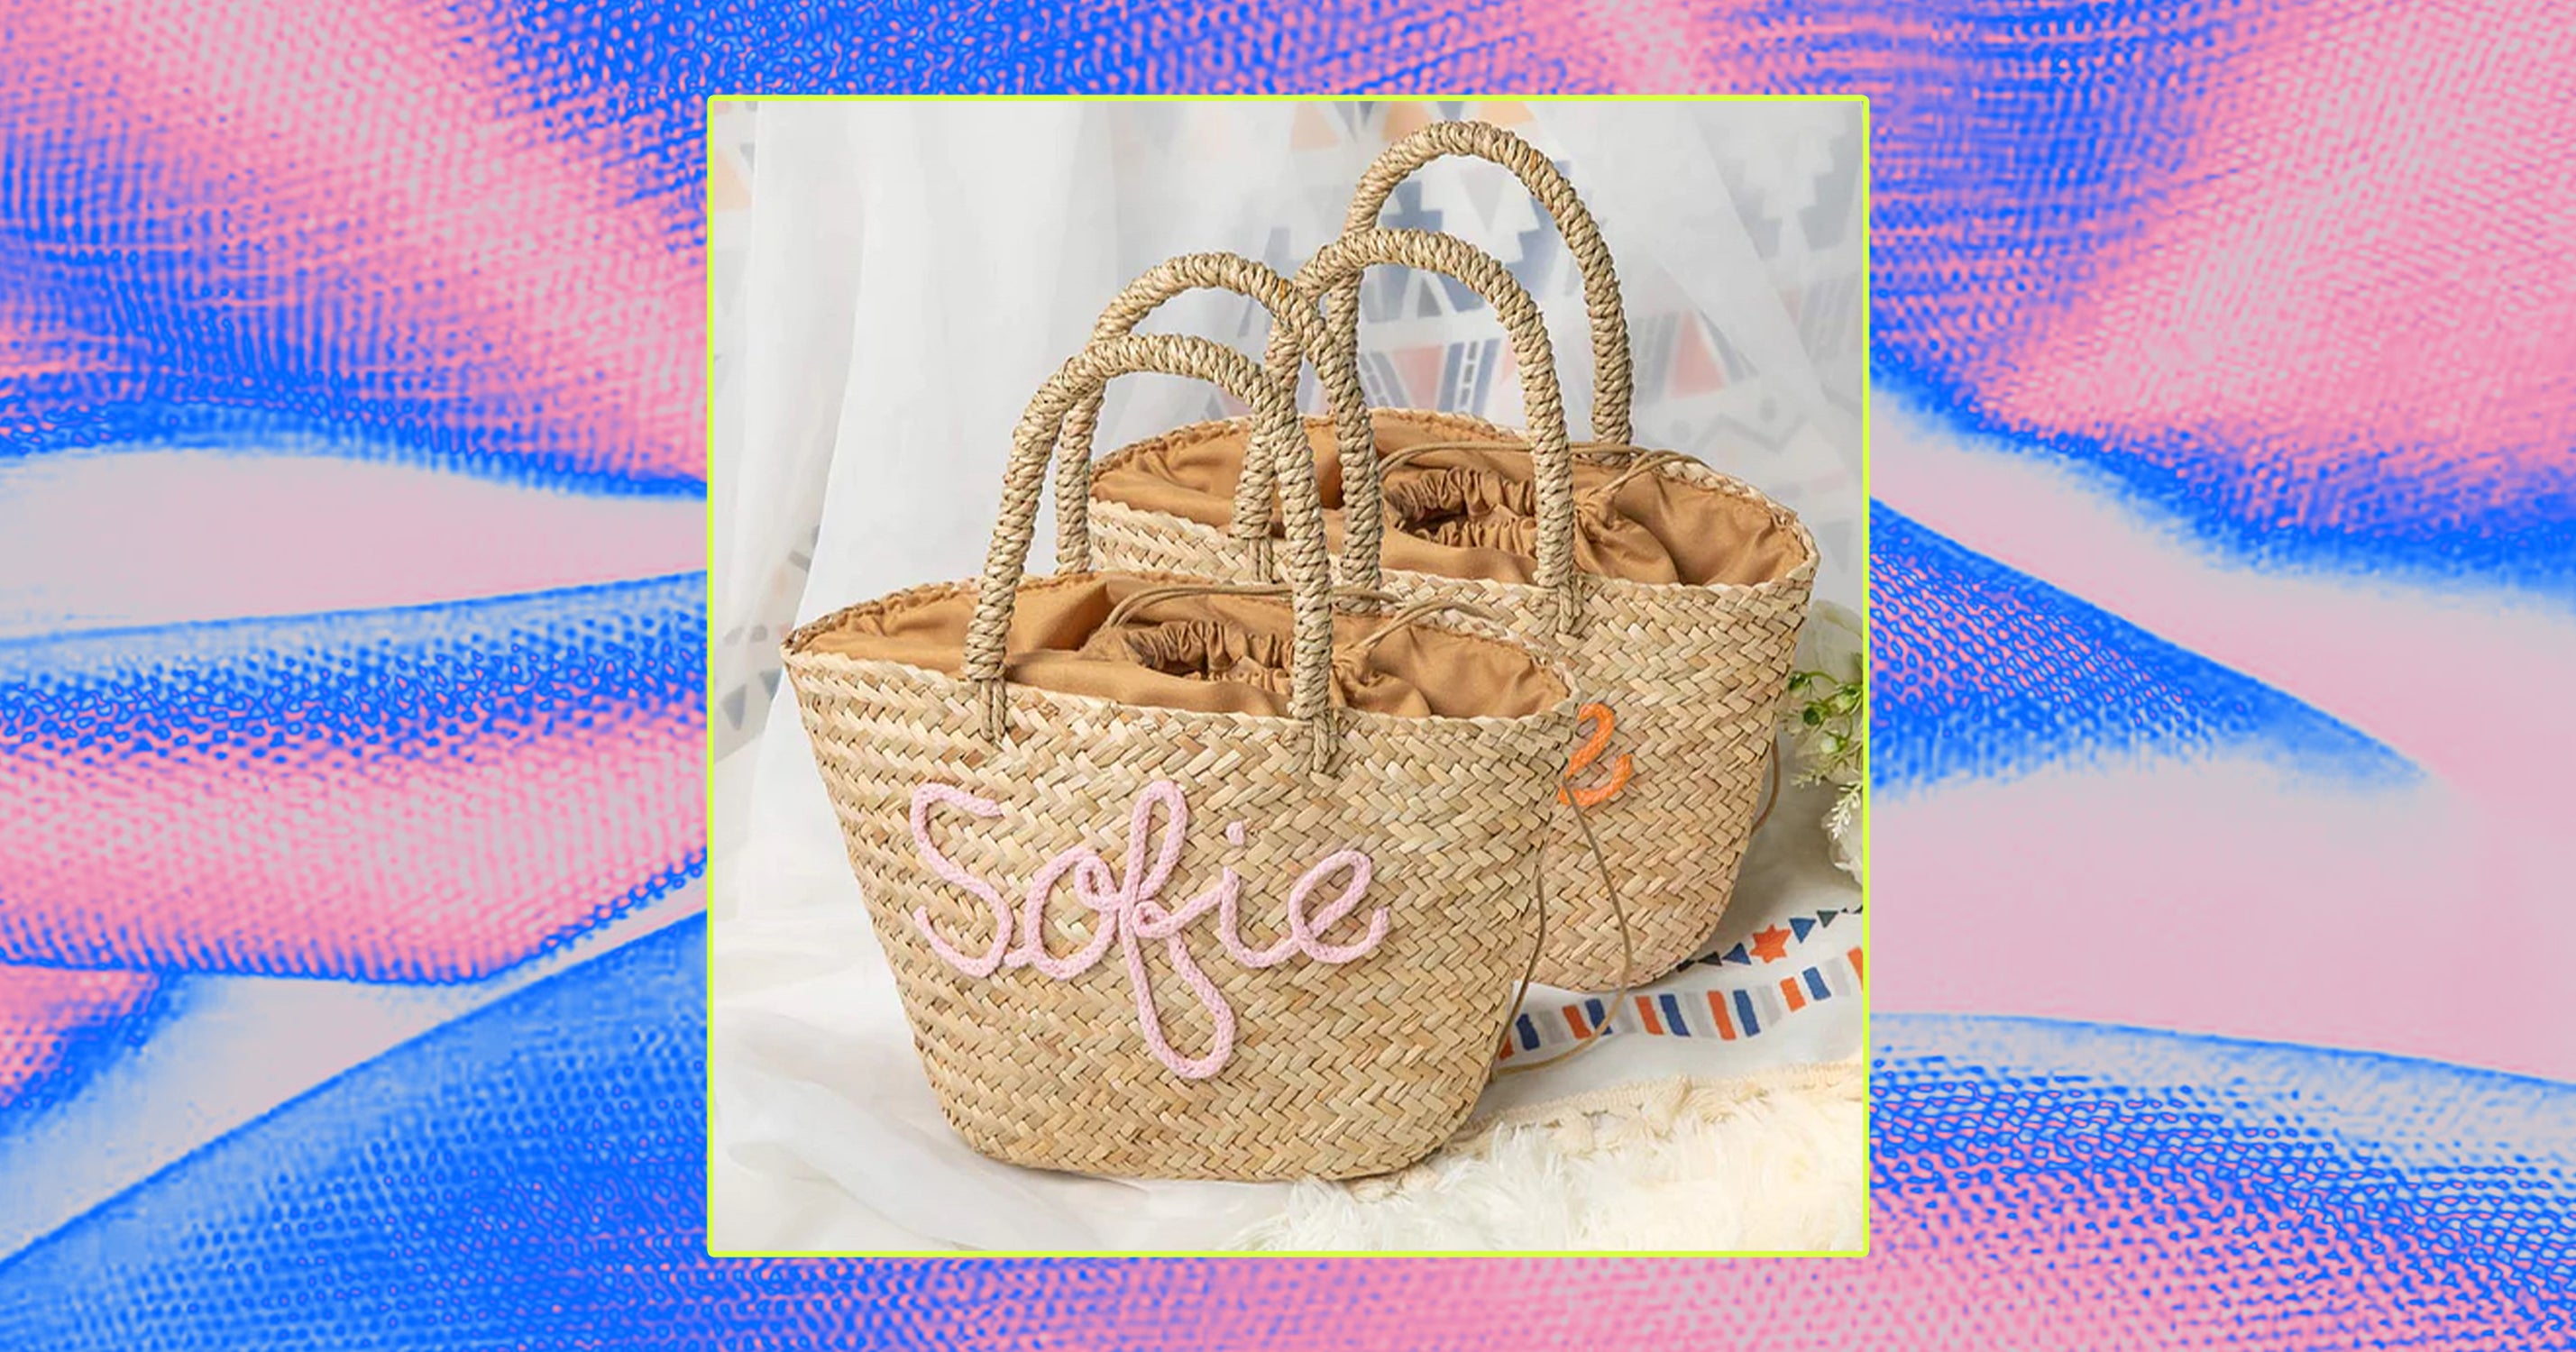 Clare V Simple Tote  40 Cute Summer (and Fall!) Handbags We're